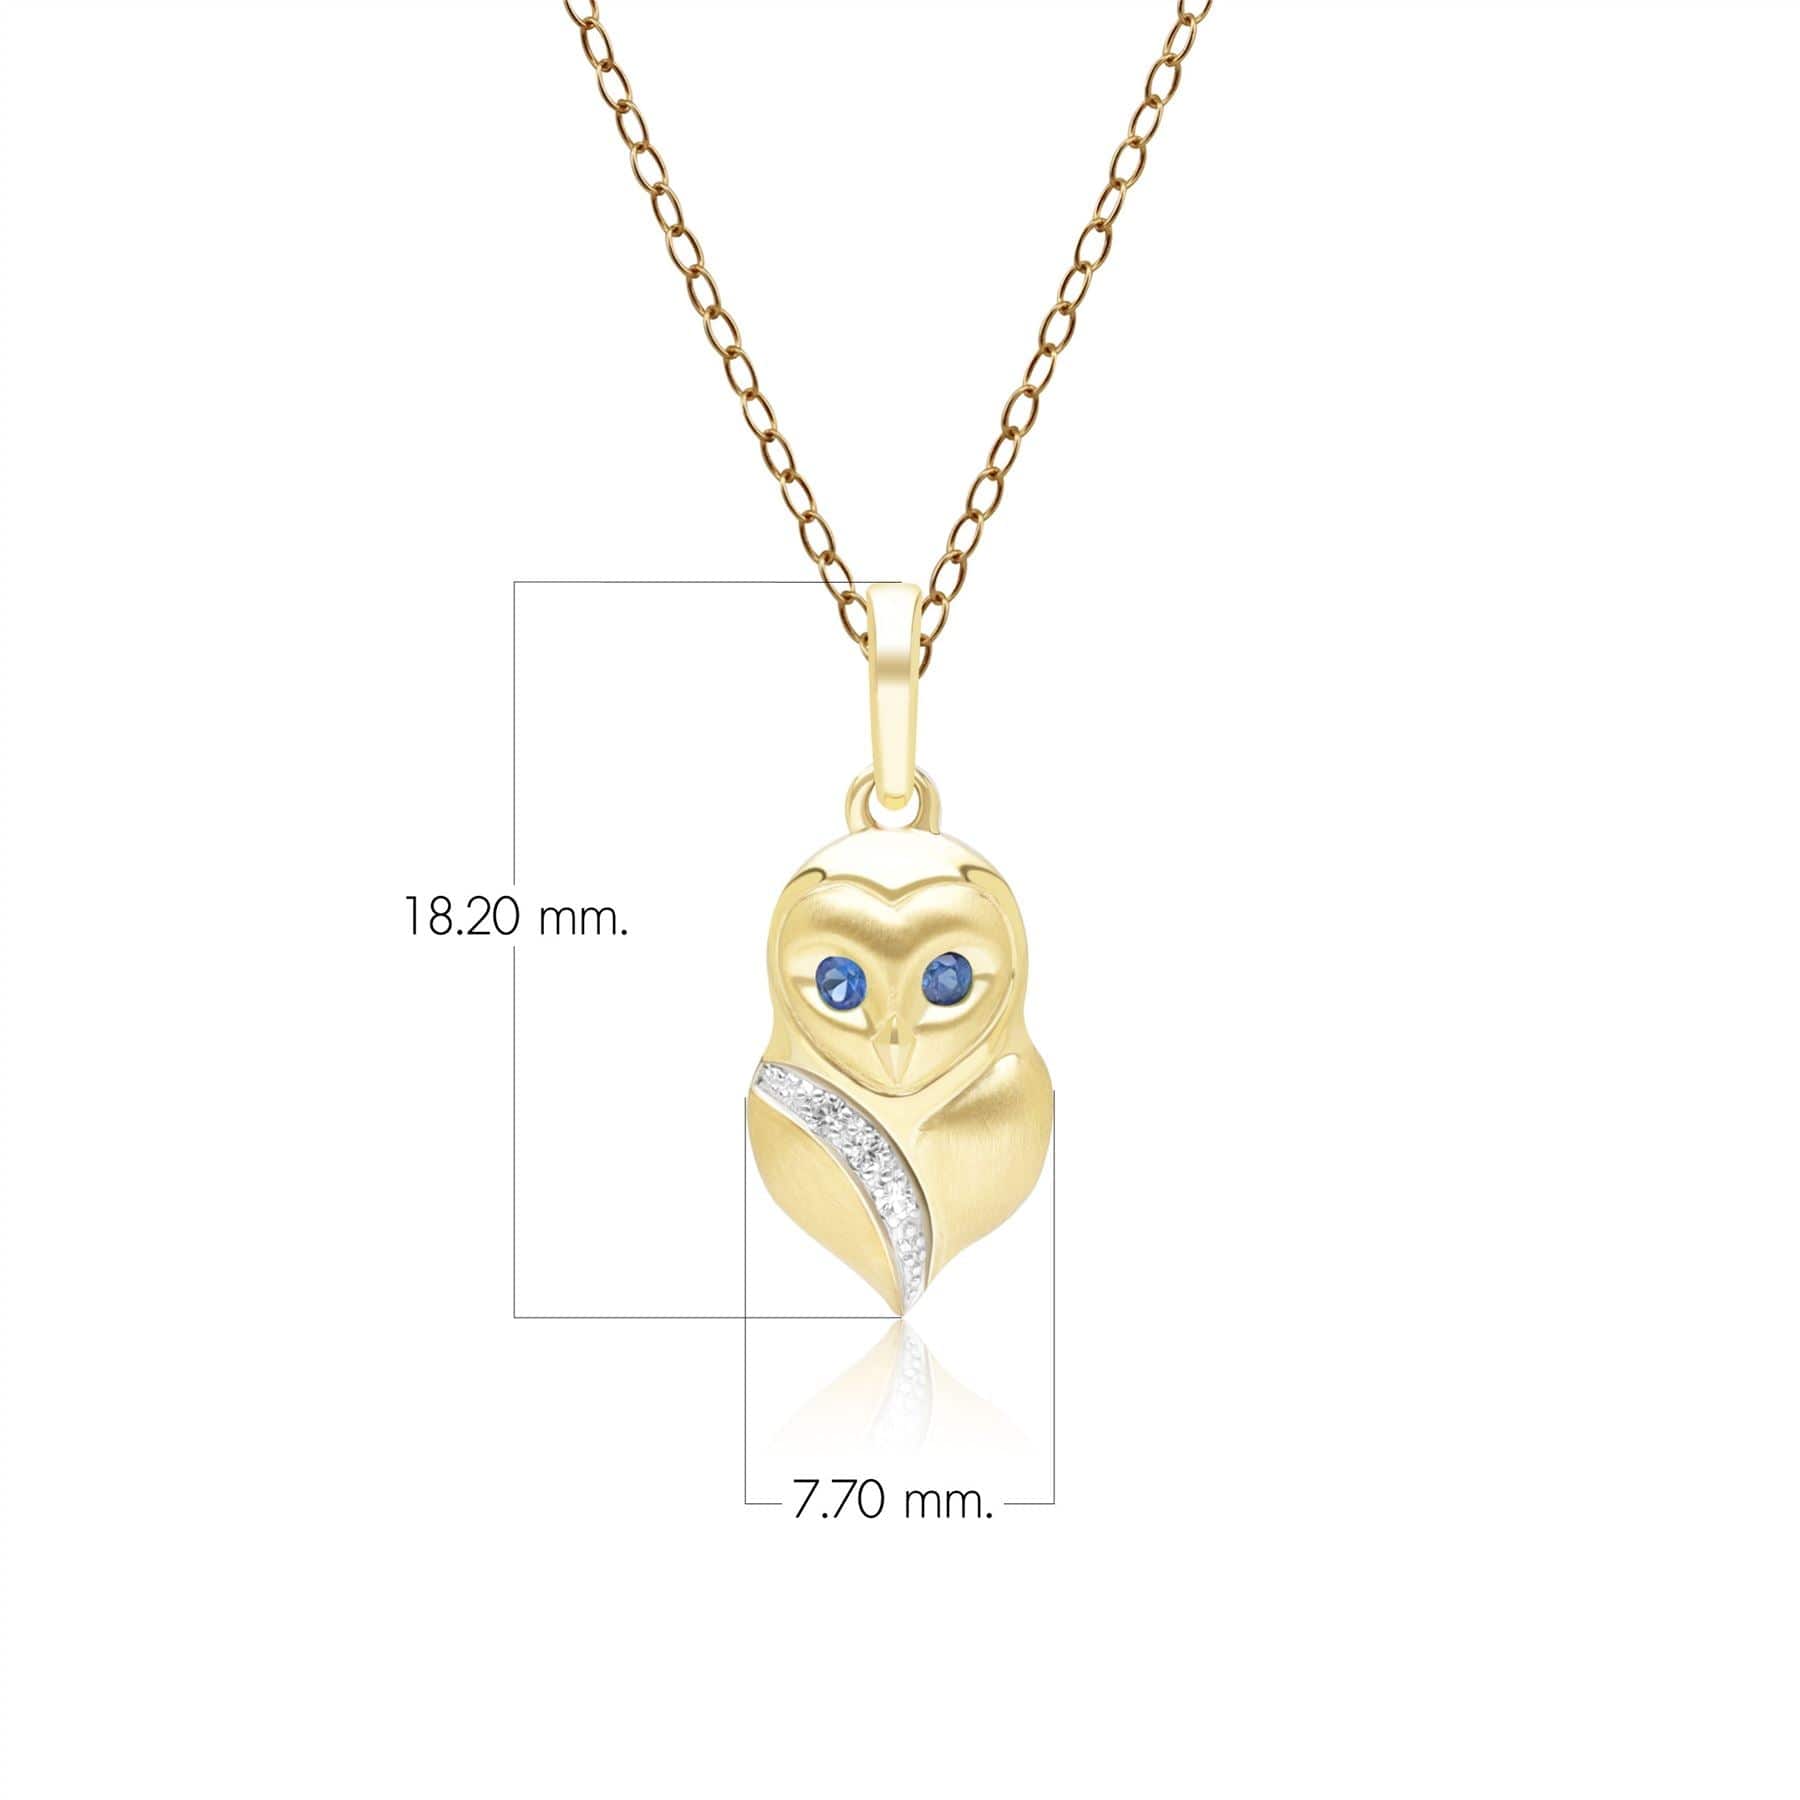 135P2128039 Gardenia Sapphire and White Sapphire Owl Pendant Necklace in 9ct Yellow Gold Dimensions